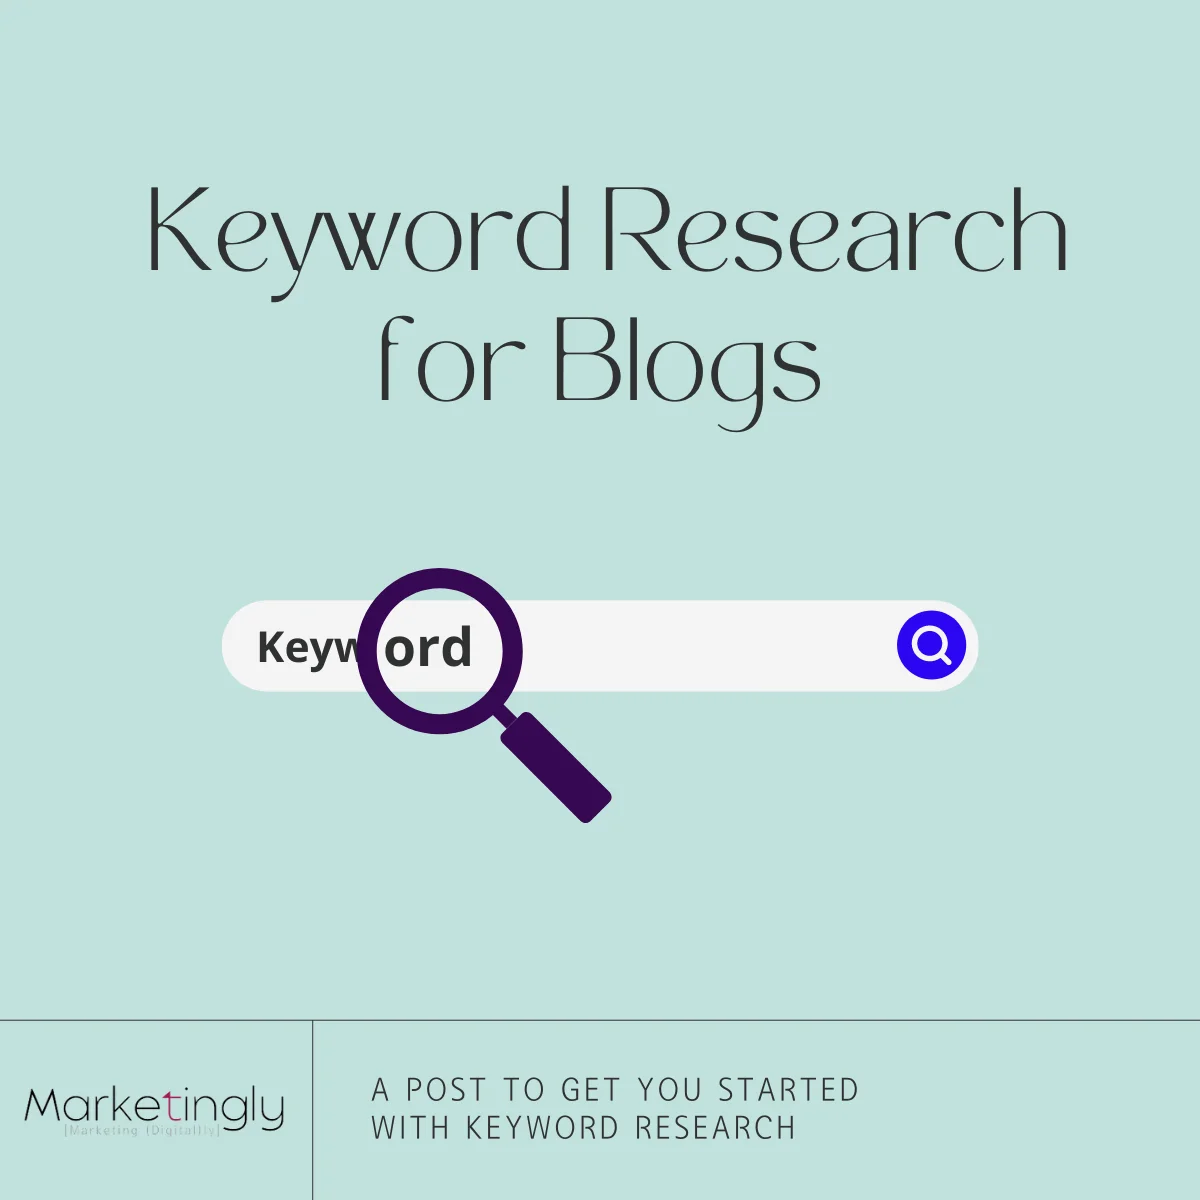 Keyword Research for Blogs – A 4 Step Beginners’ Guide